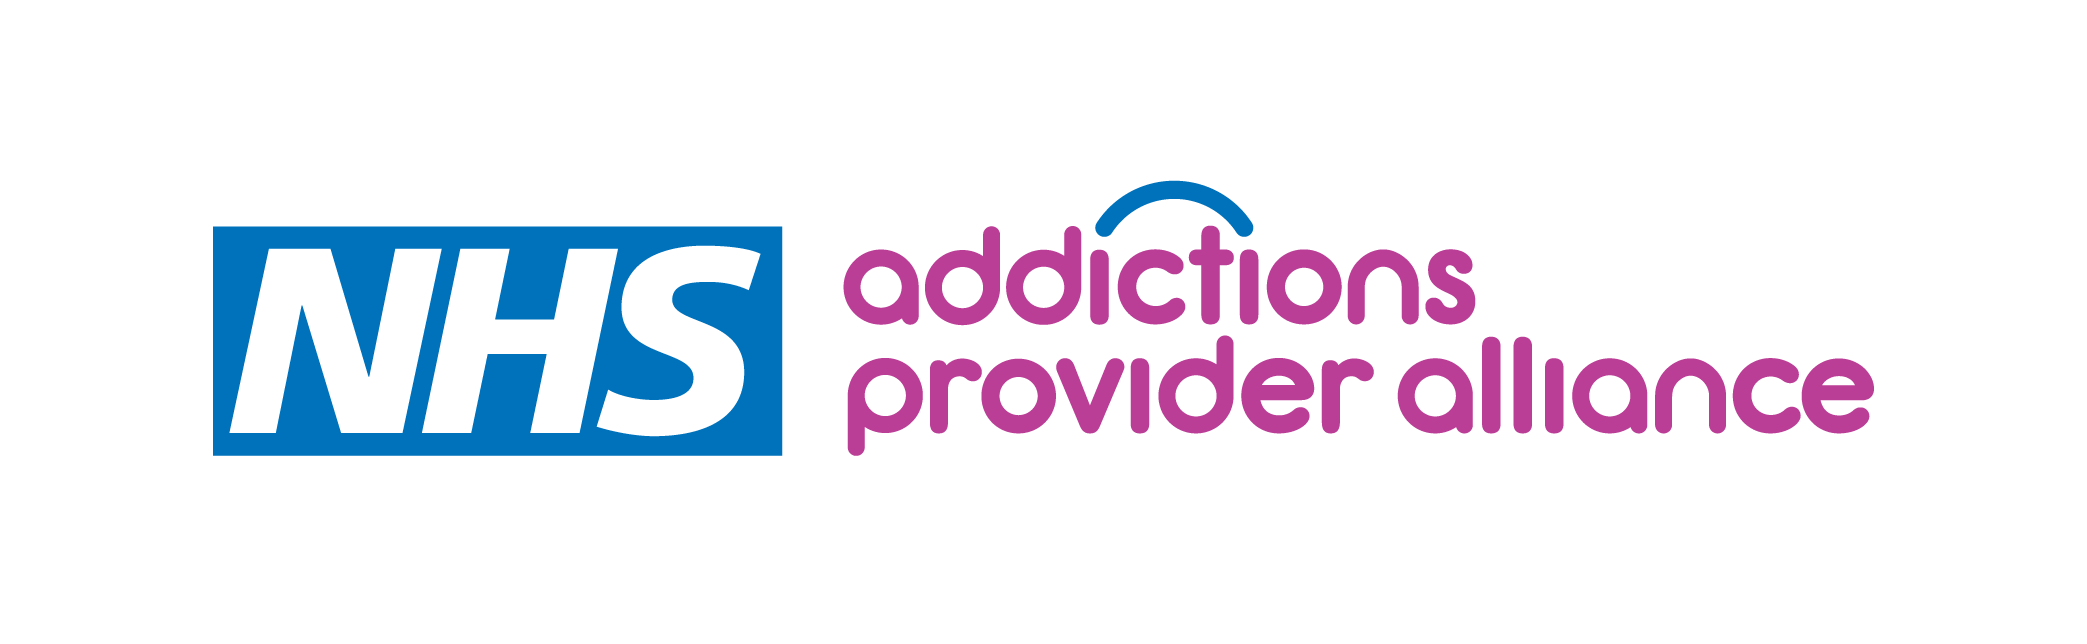 NHS Addiction Provider Alliance featured image